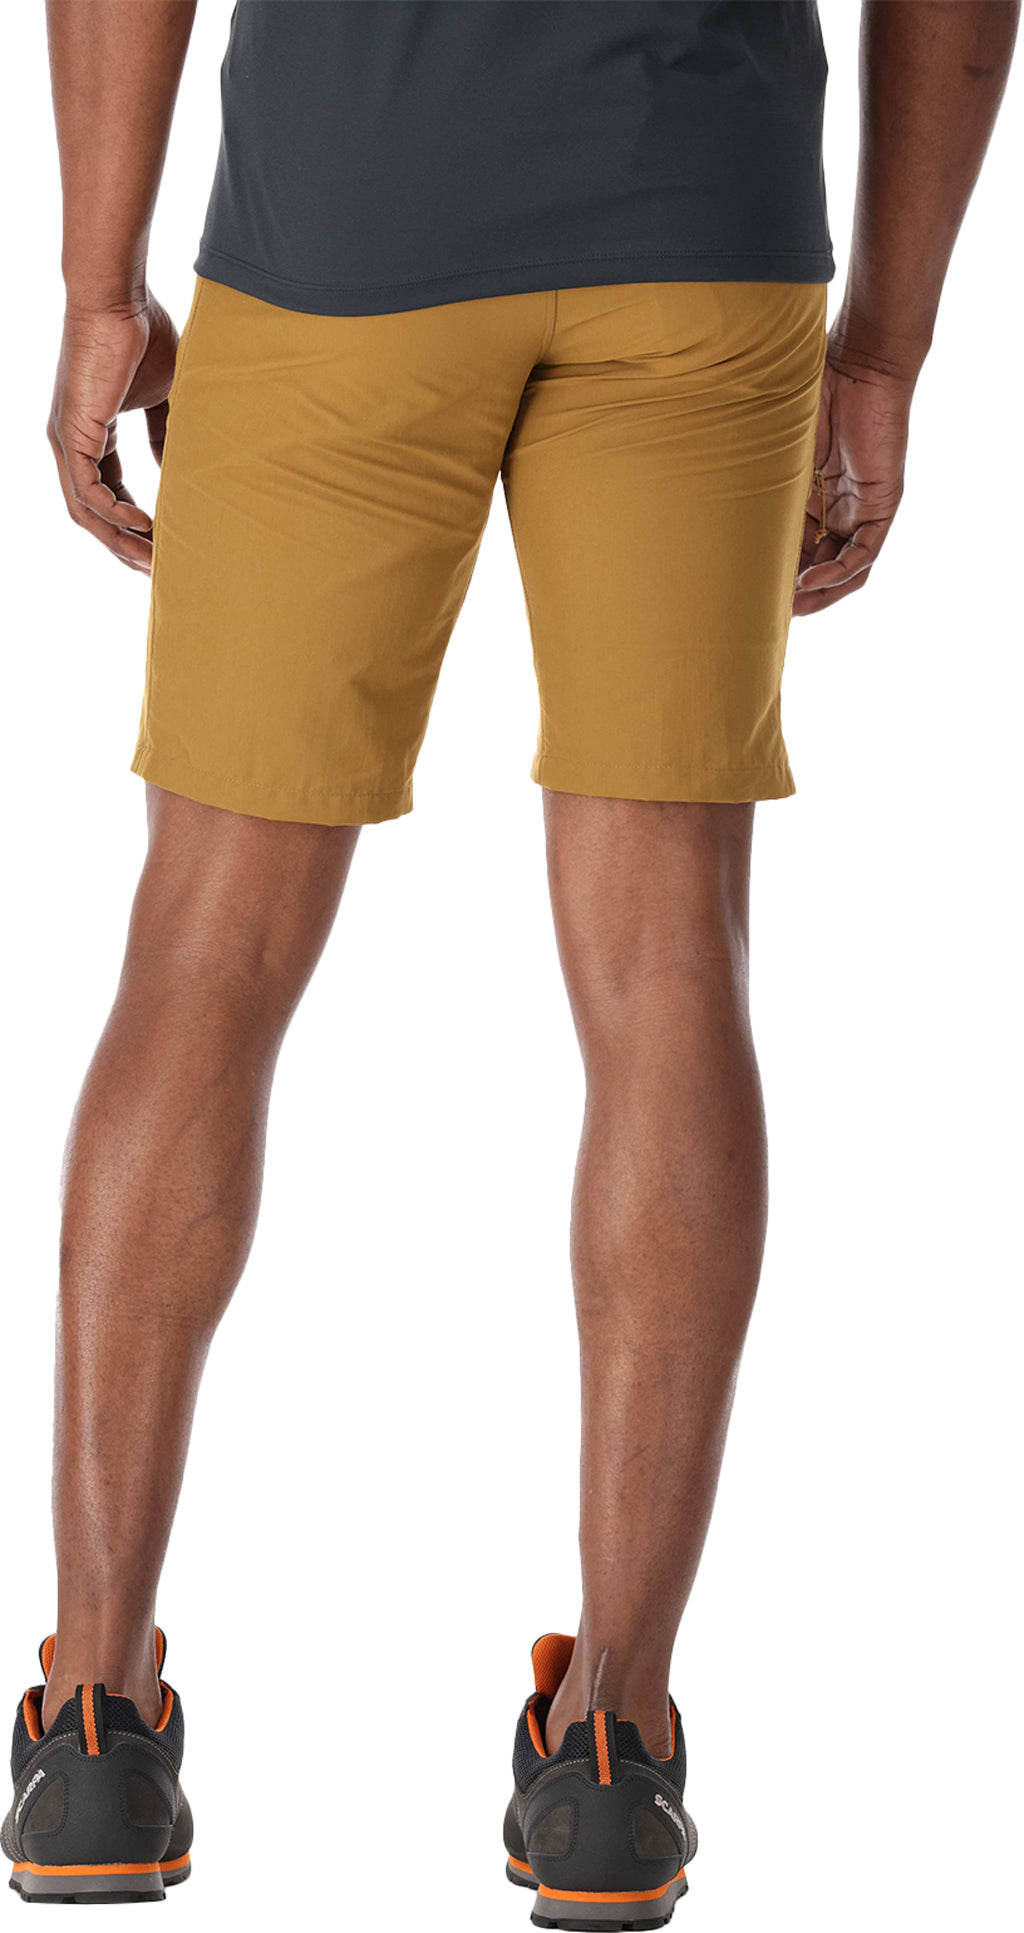 Rab Talus Trail Light Shorts, 7 Inseam - Mens, FREE SHIPPING in Canada